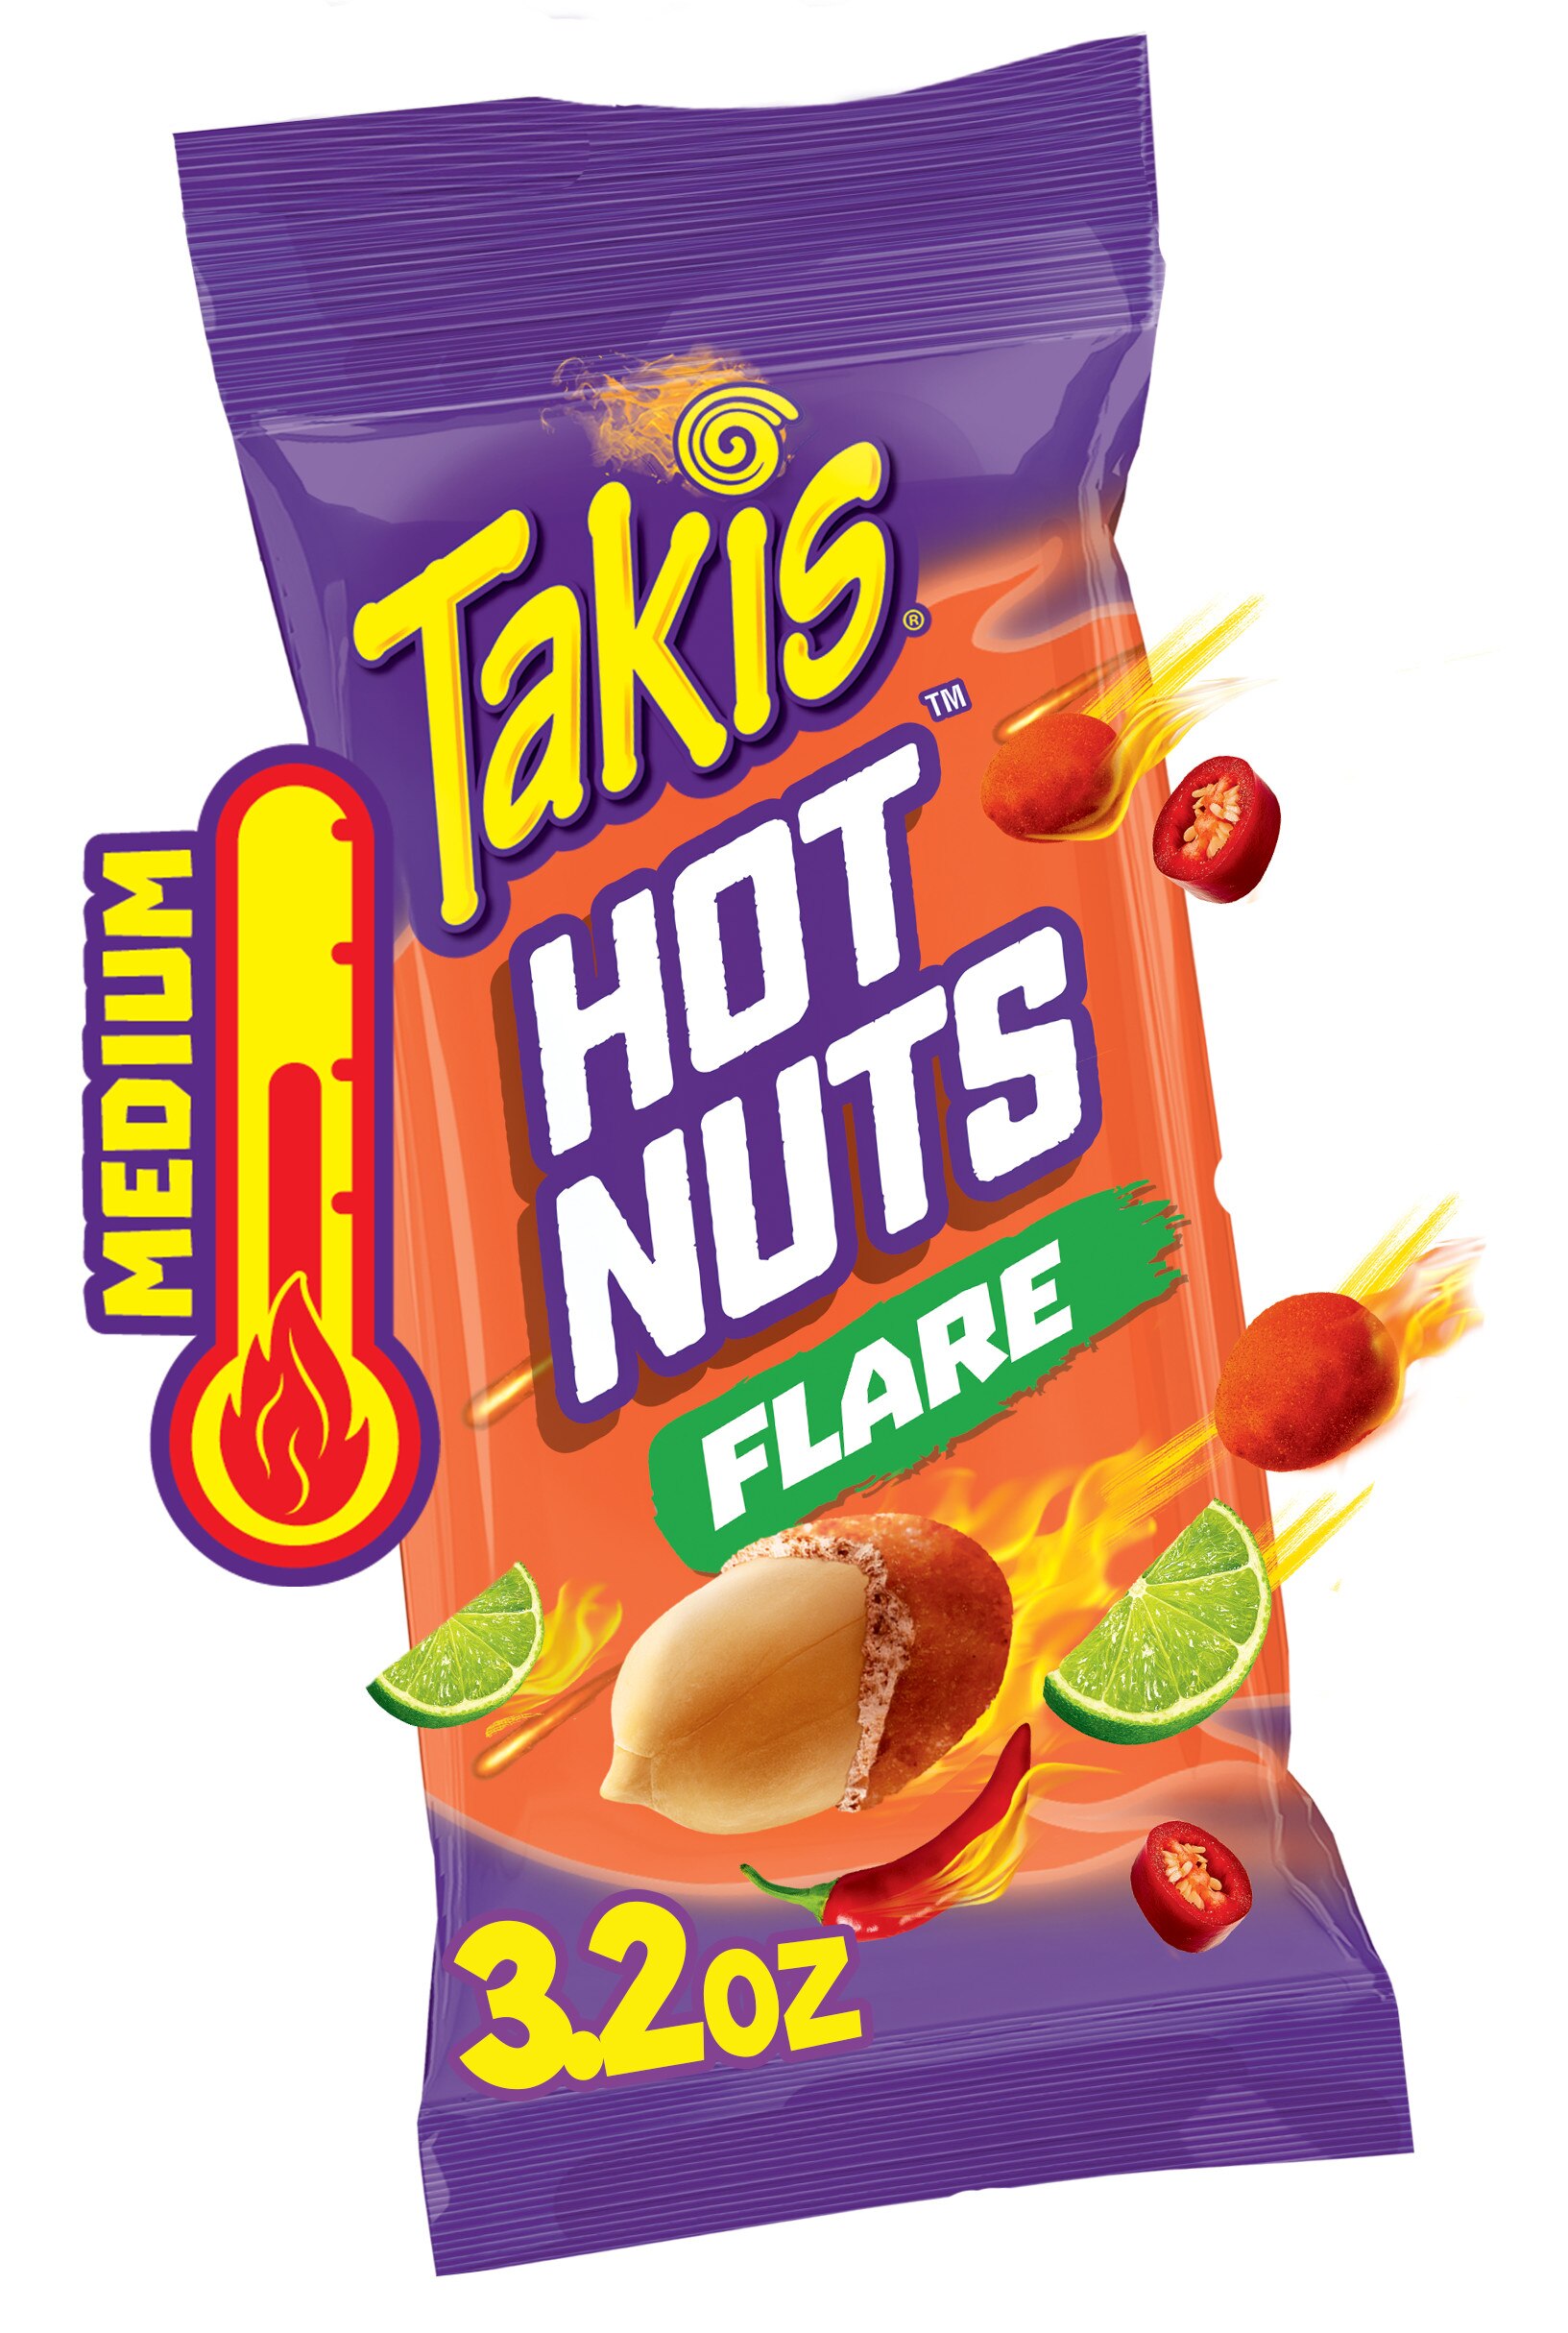 Takis Double Crunch Flare Hot Nuts, 3.2 OZ